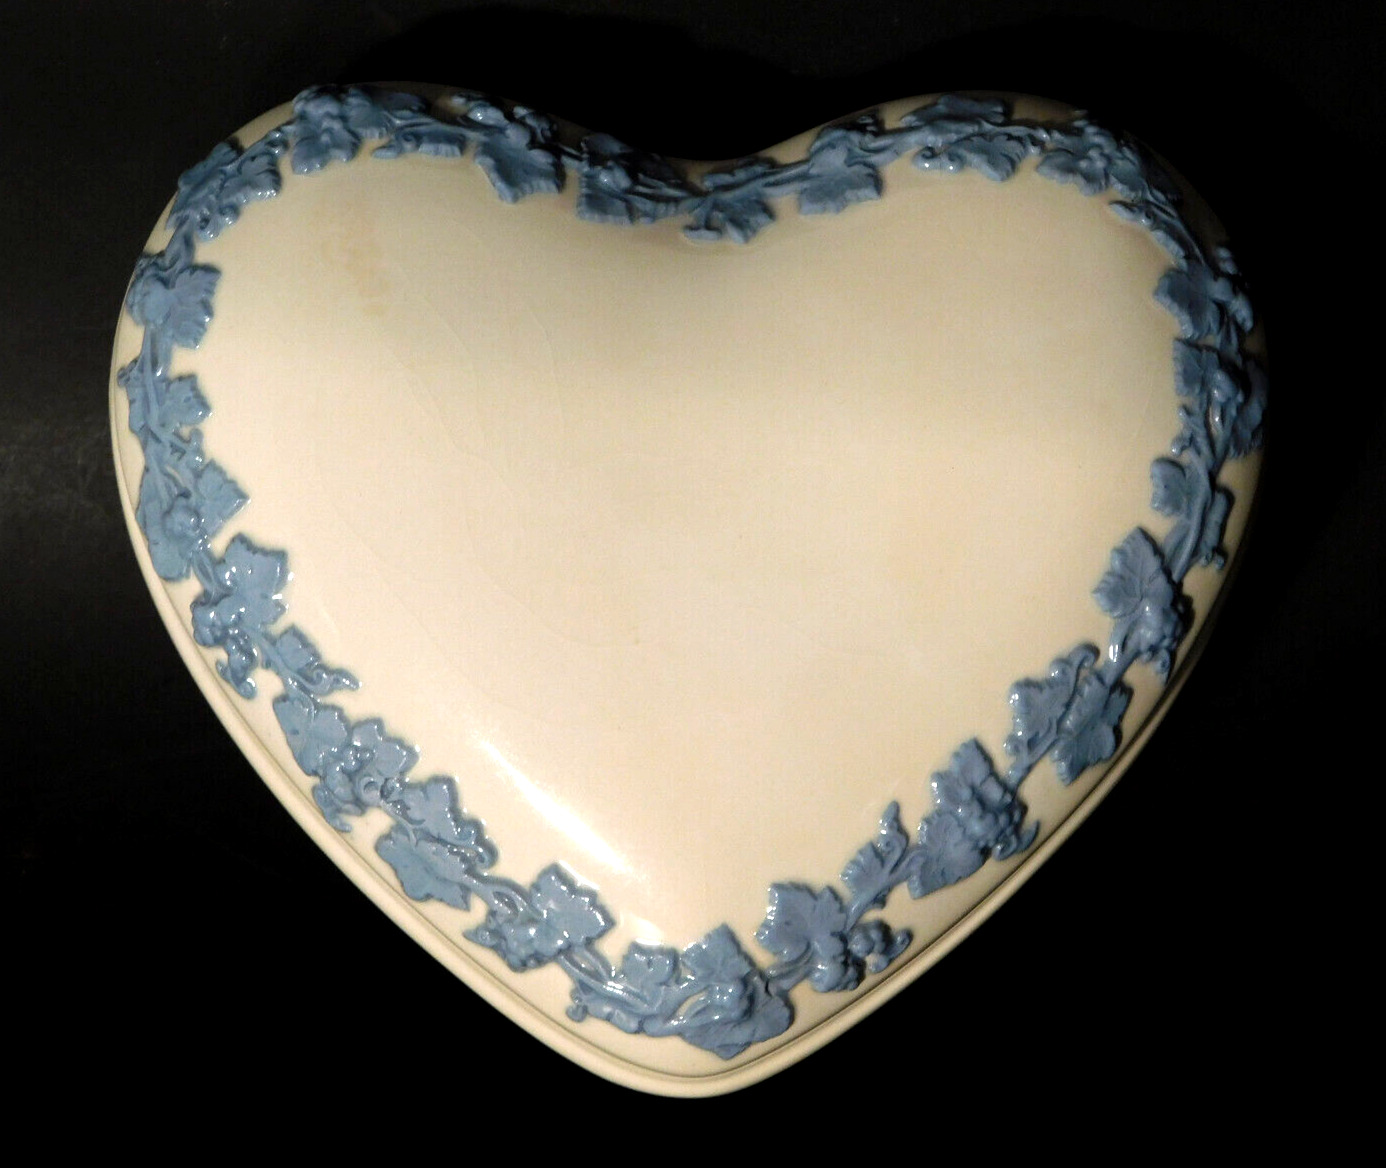 Wedgwood Queen's Ware Embossed Large Blue on White Heart Trinket Box